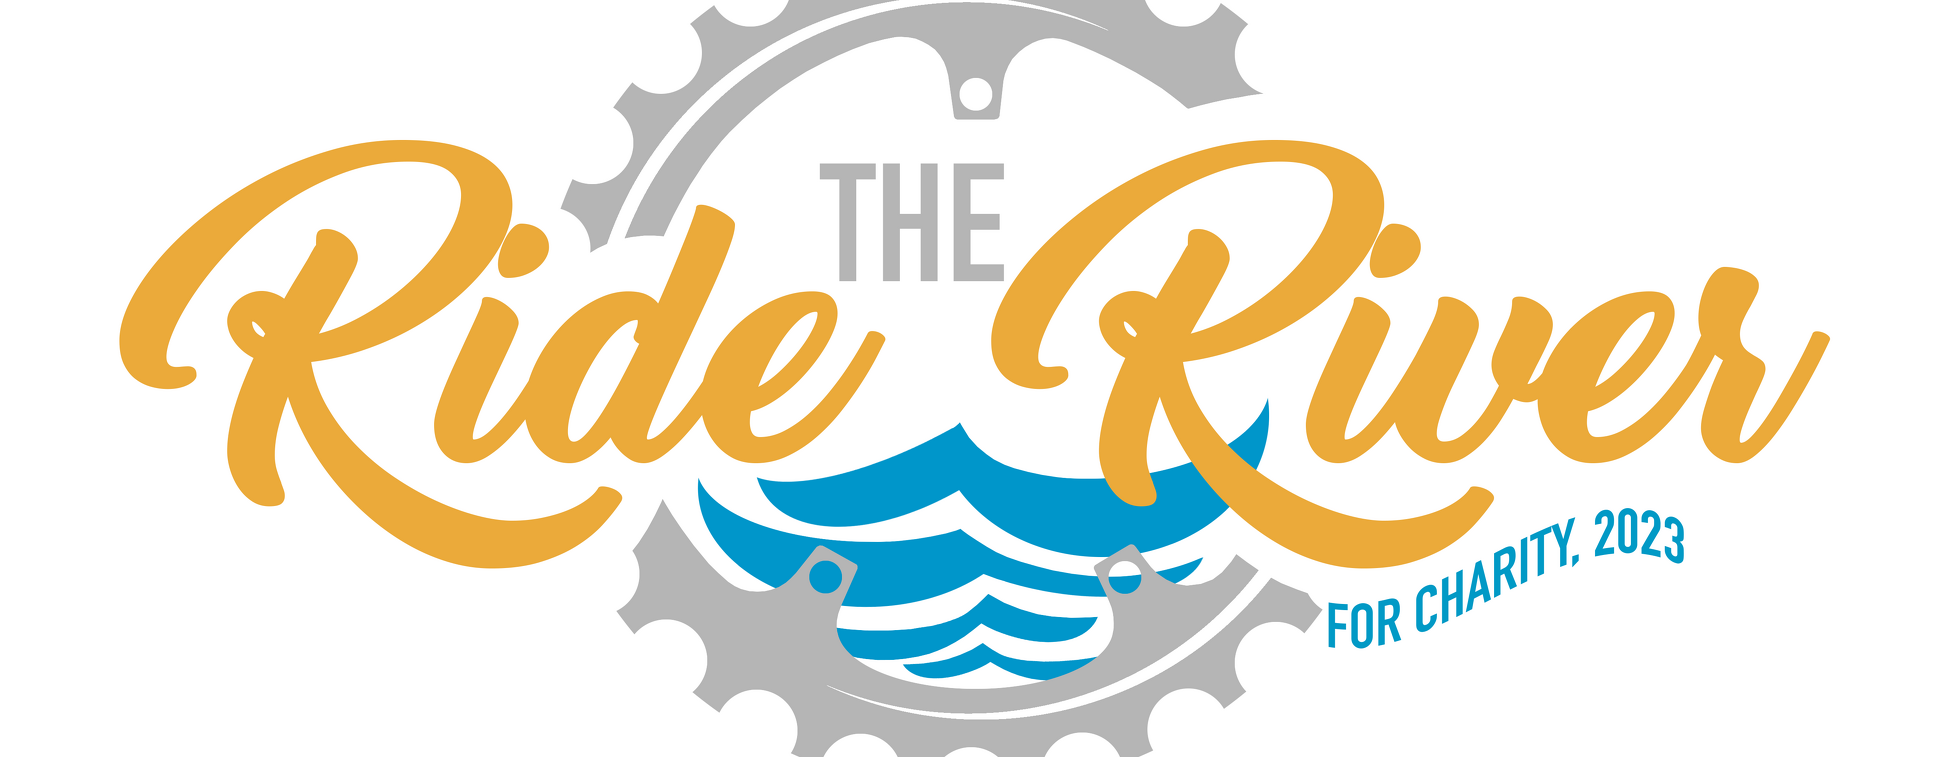 AE Cares Ride The River 2023